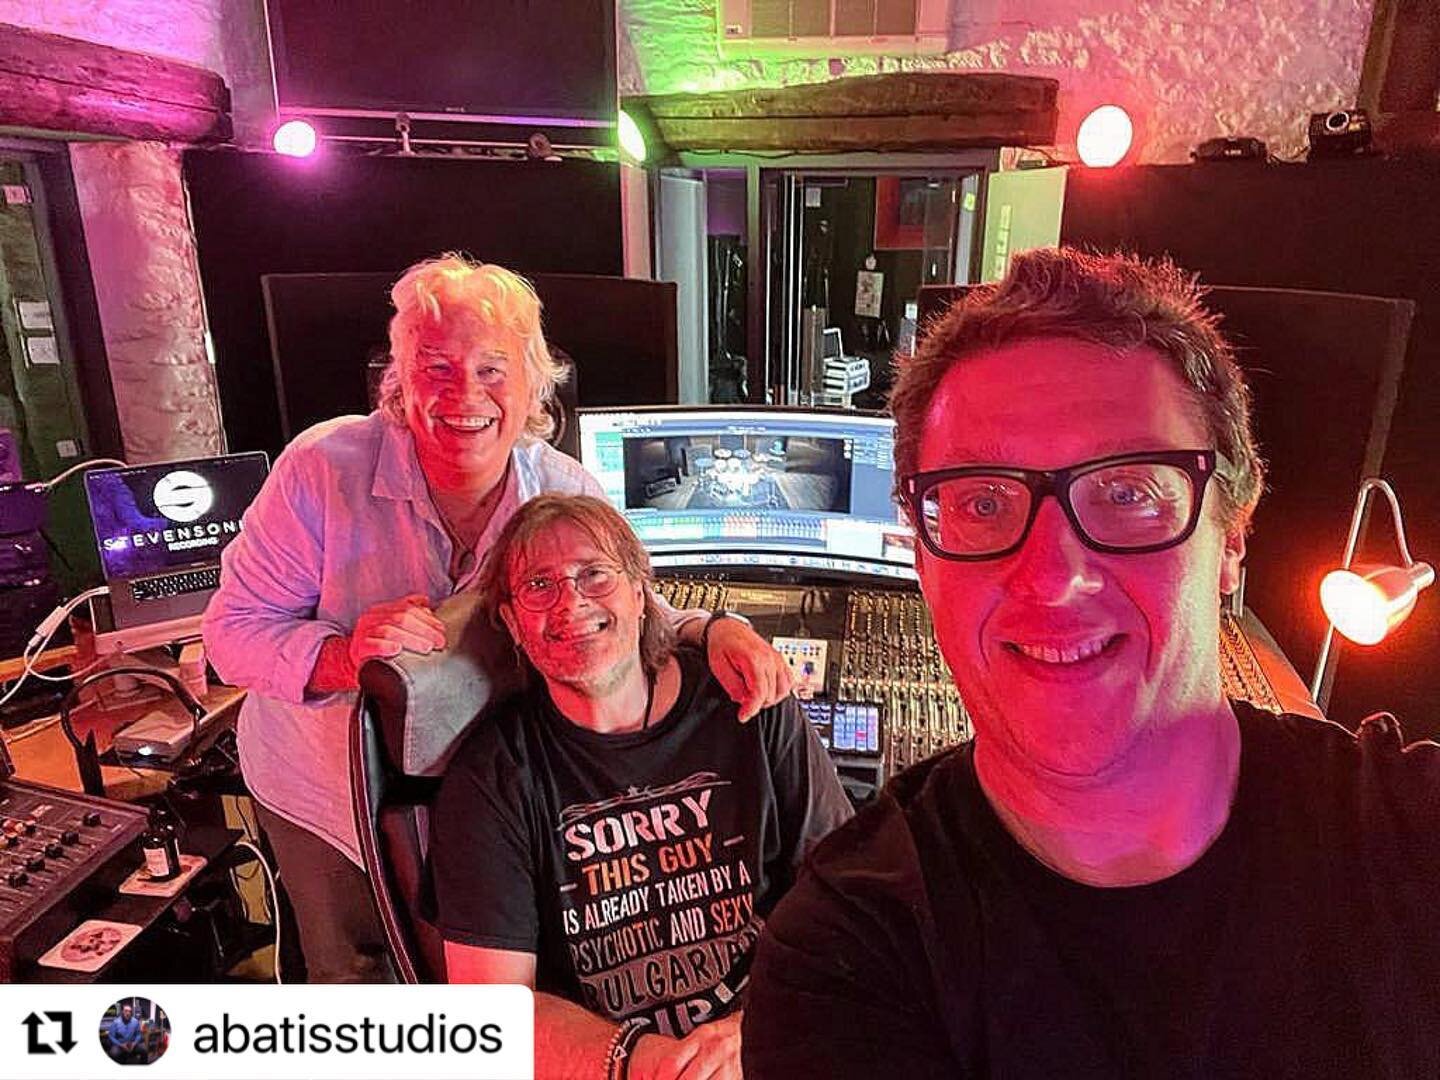 Lovely day with @stevensonics &amp; @abatisstudios working on sounds for @thetonyhadley with the awesome @toontrack products. #studio #recordingstudio #producer #mixing #songwriting #song #newmusic #drums #toontrack #writing #engineer #soundengineer 